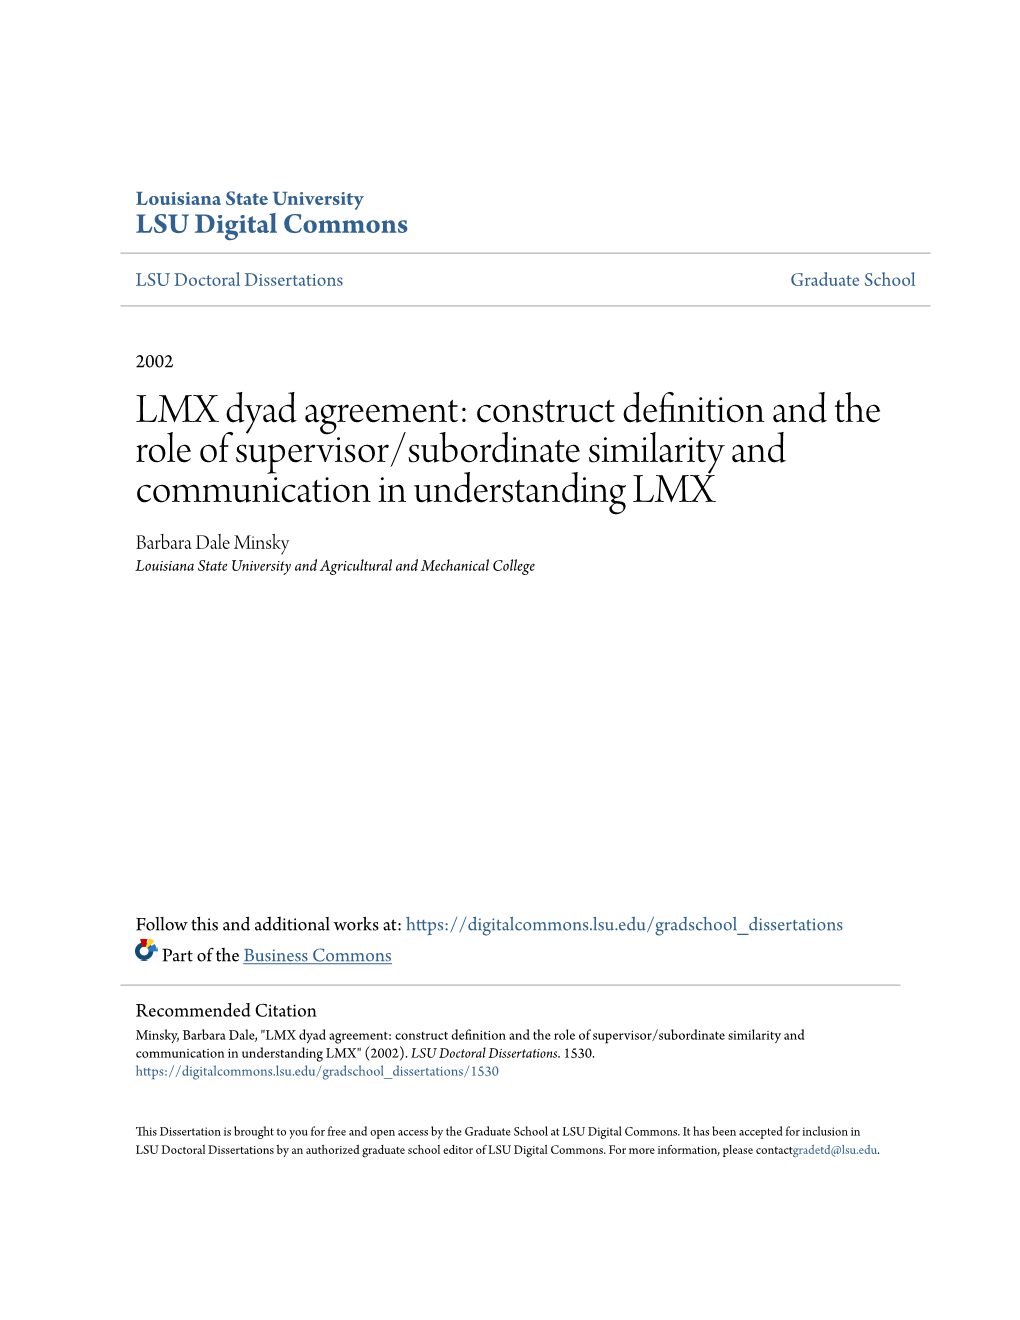 LMX Dyad Agreement: Construct Definition and the Role of Supervisor